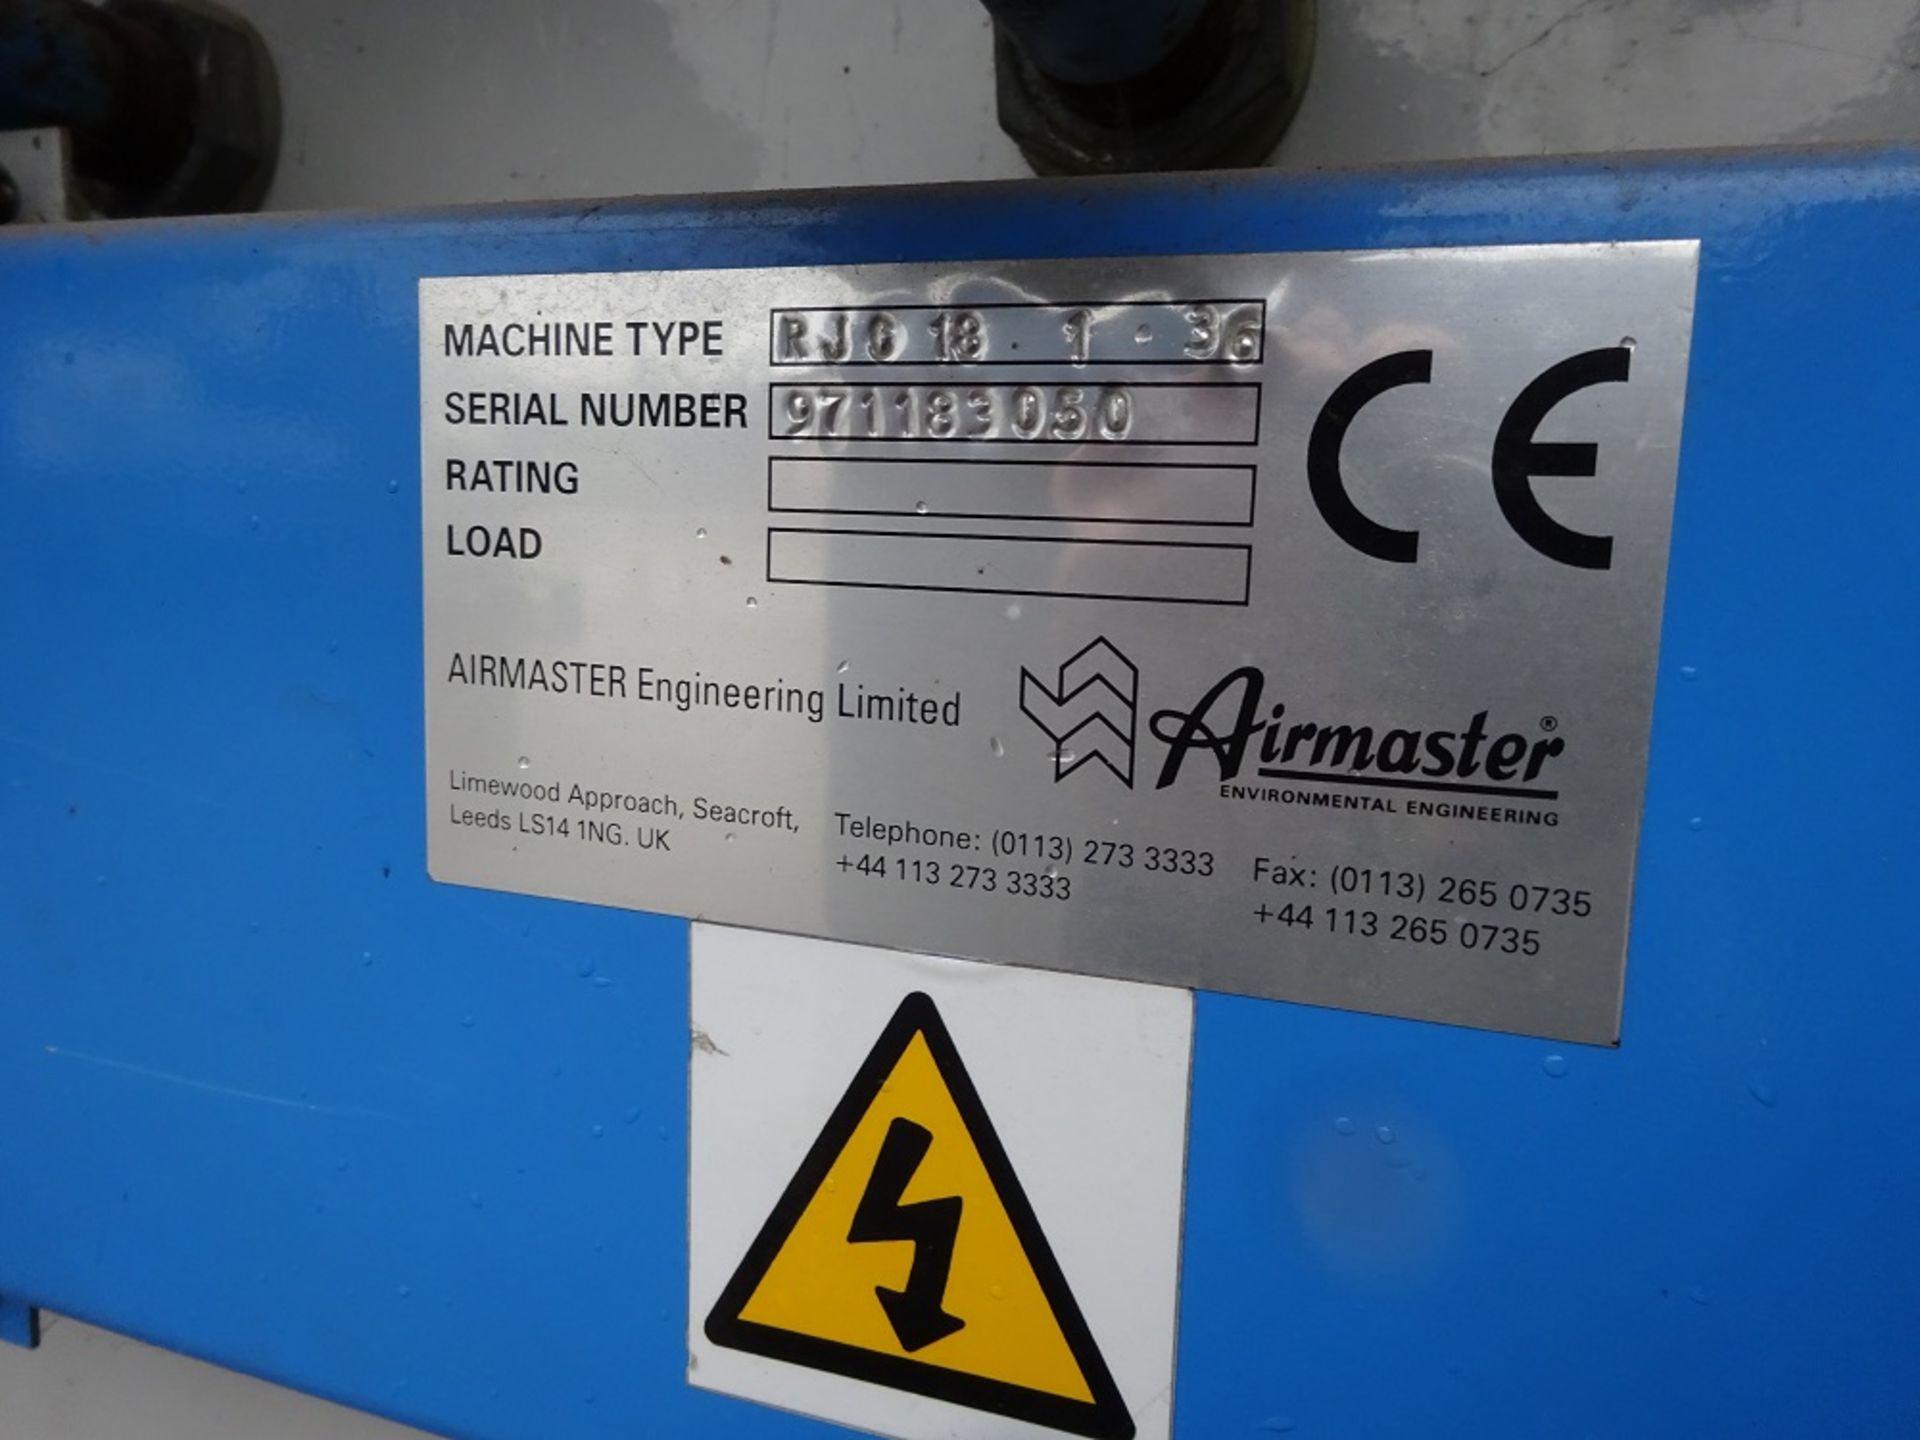 Airmaster model RJC 18-1-36 cartridge filter. Lot located Gloucester. Free loading - yes. Please - Image 2 of 4